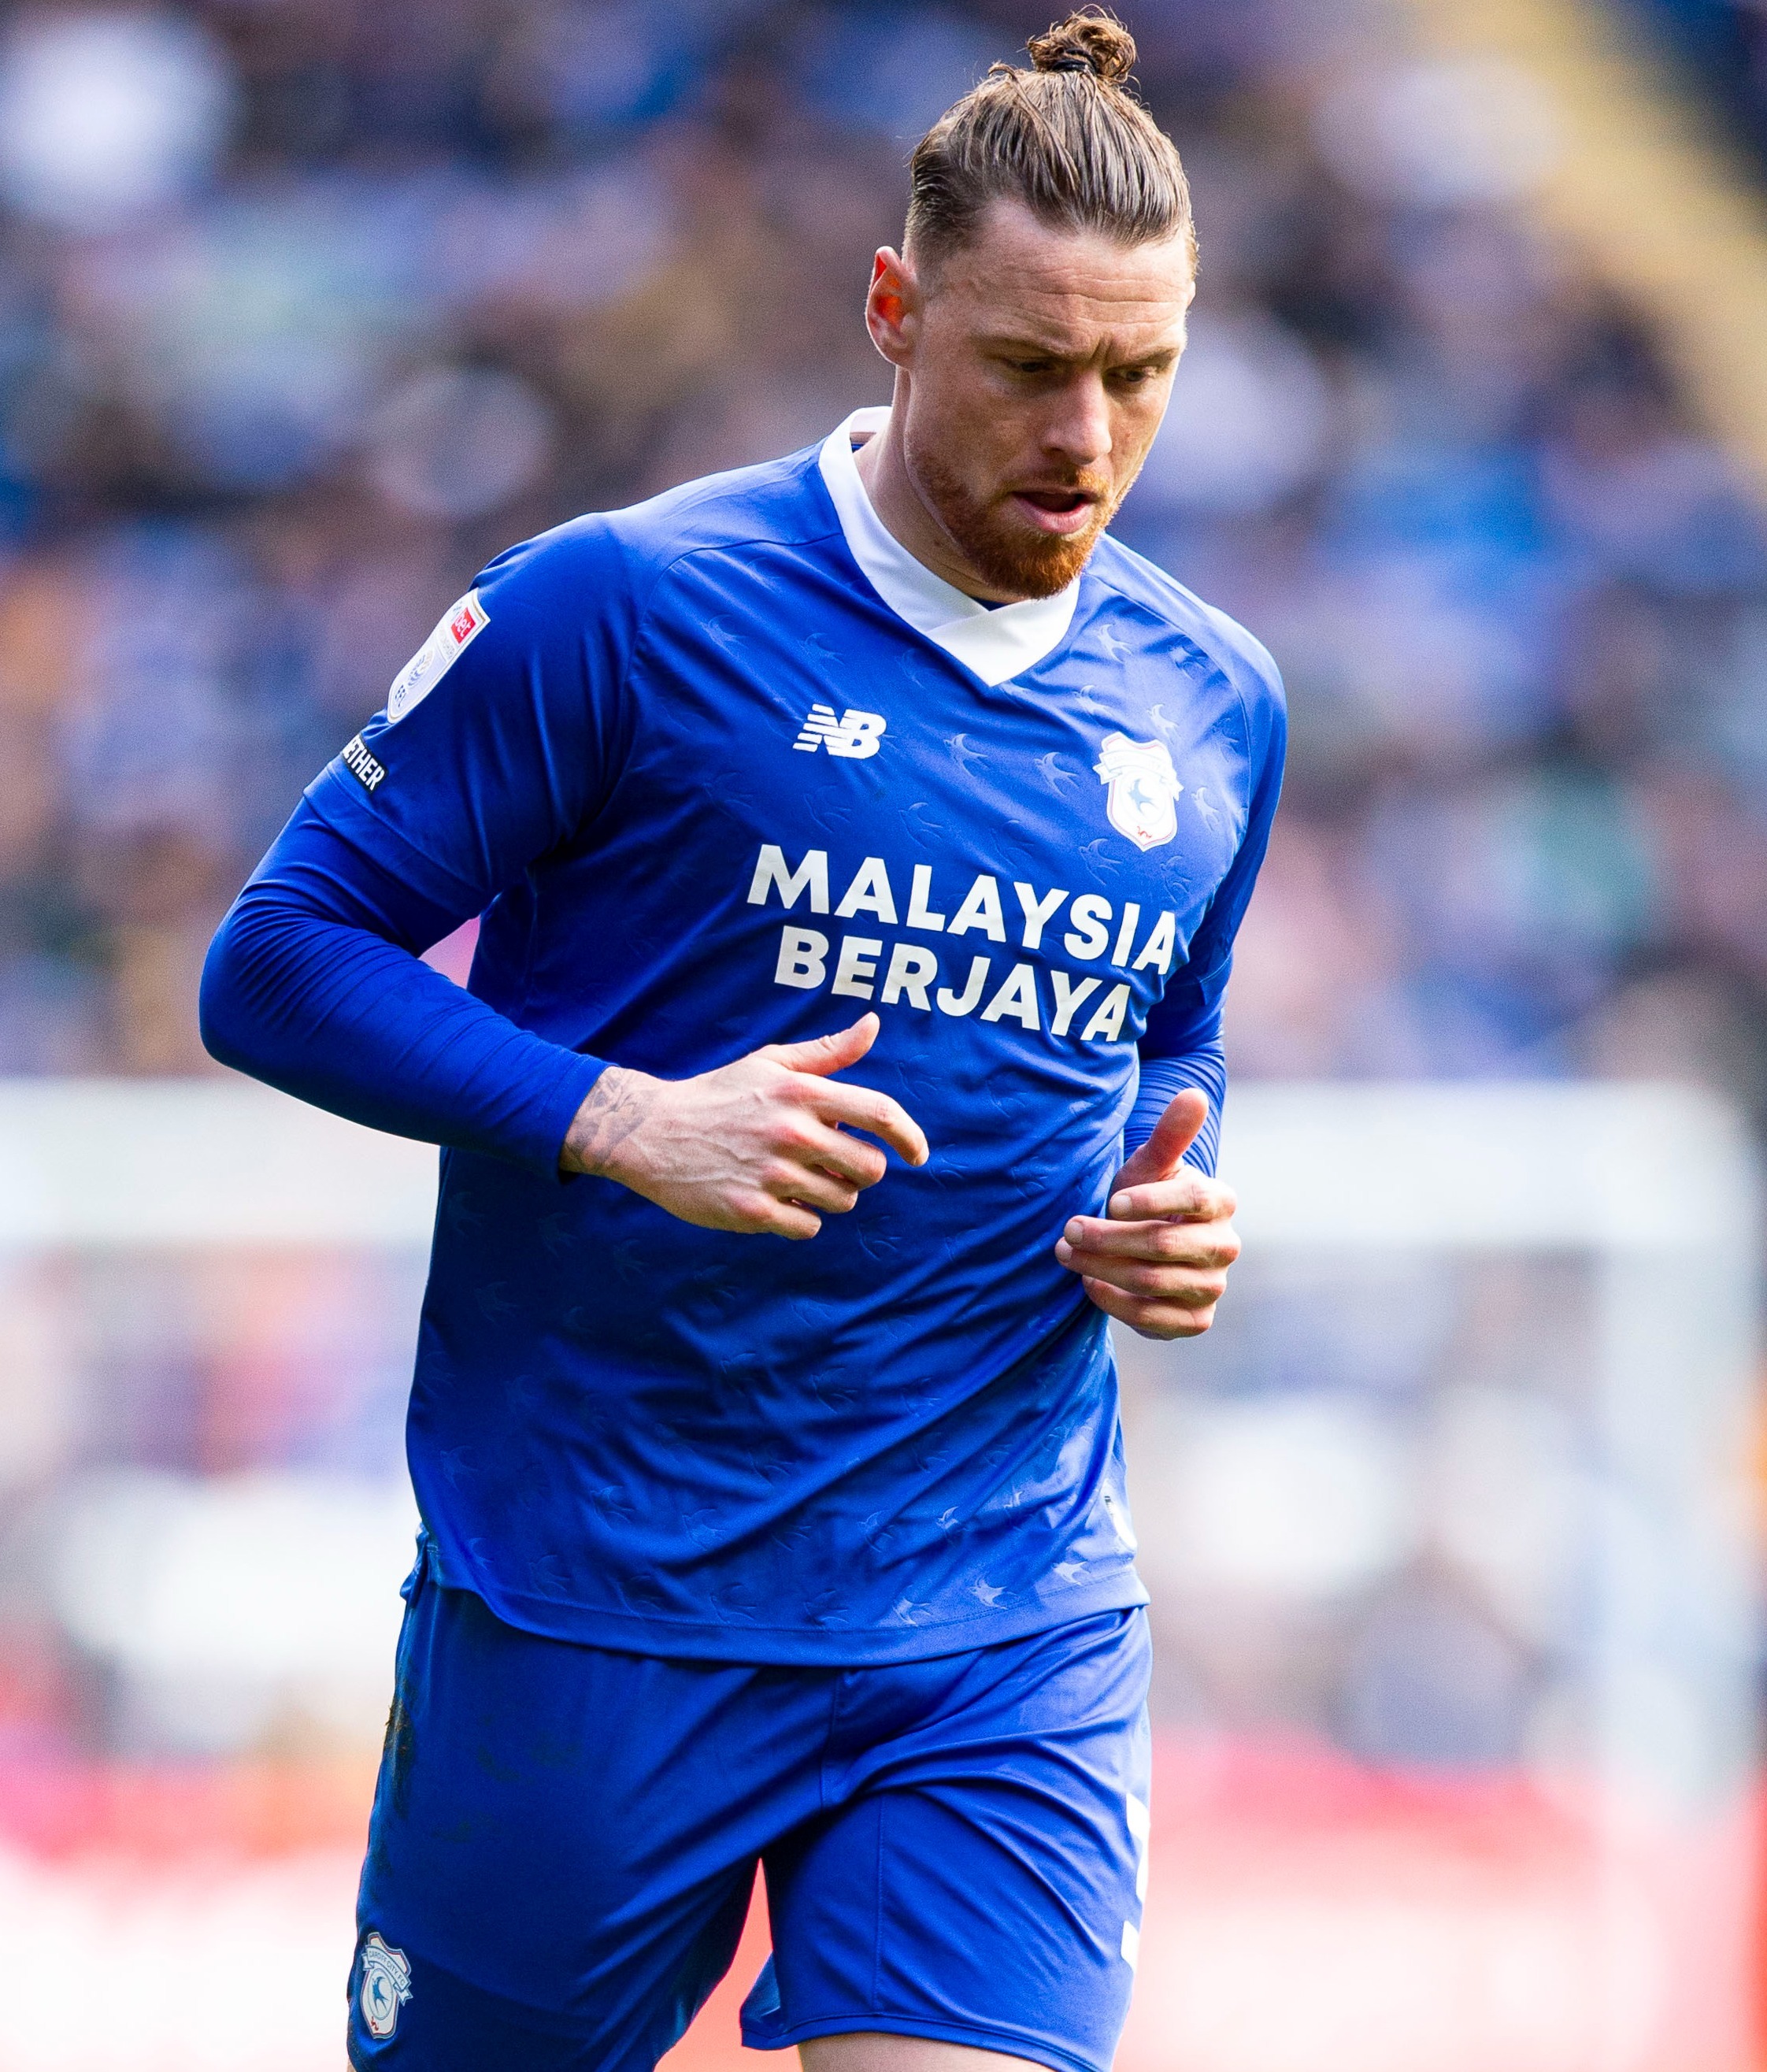 , Cardiff City star Connor Wickham posts vid ‘inhaling hippy crack’ after Swansea defeat as he responds to angry fans